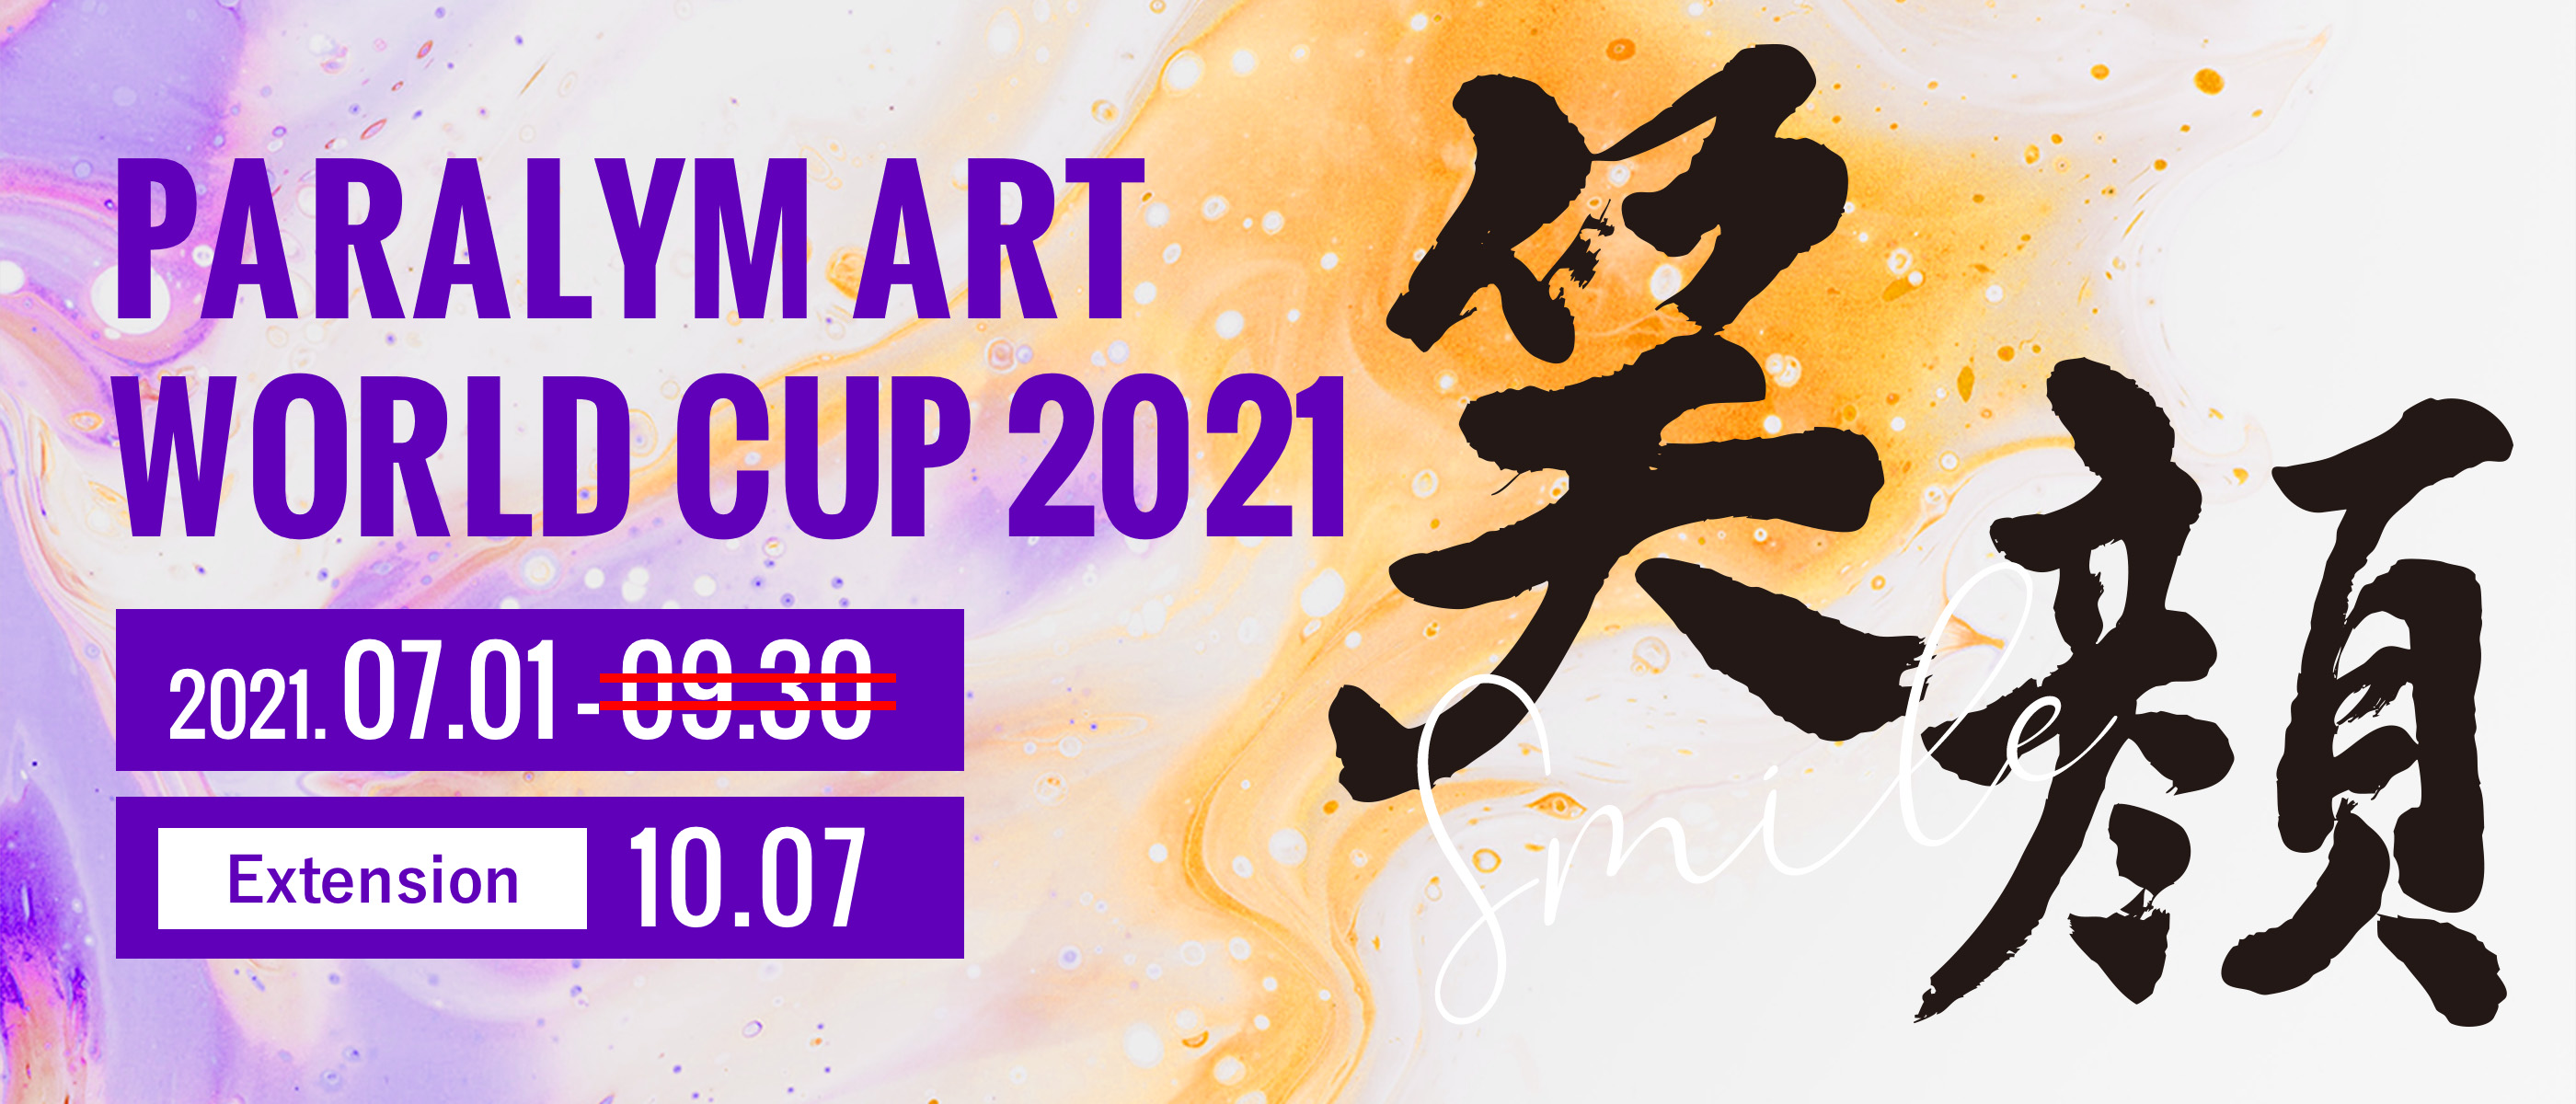 PARALYM ART WORLD CUP 2021 2021. 07.01 - 09.30 笑顔 extension 10.07